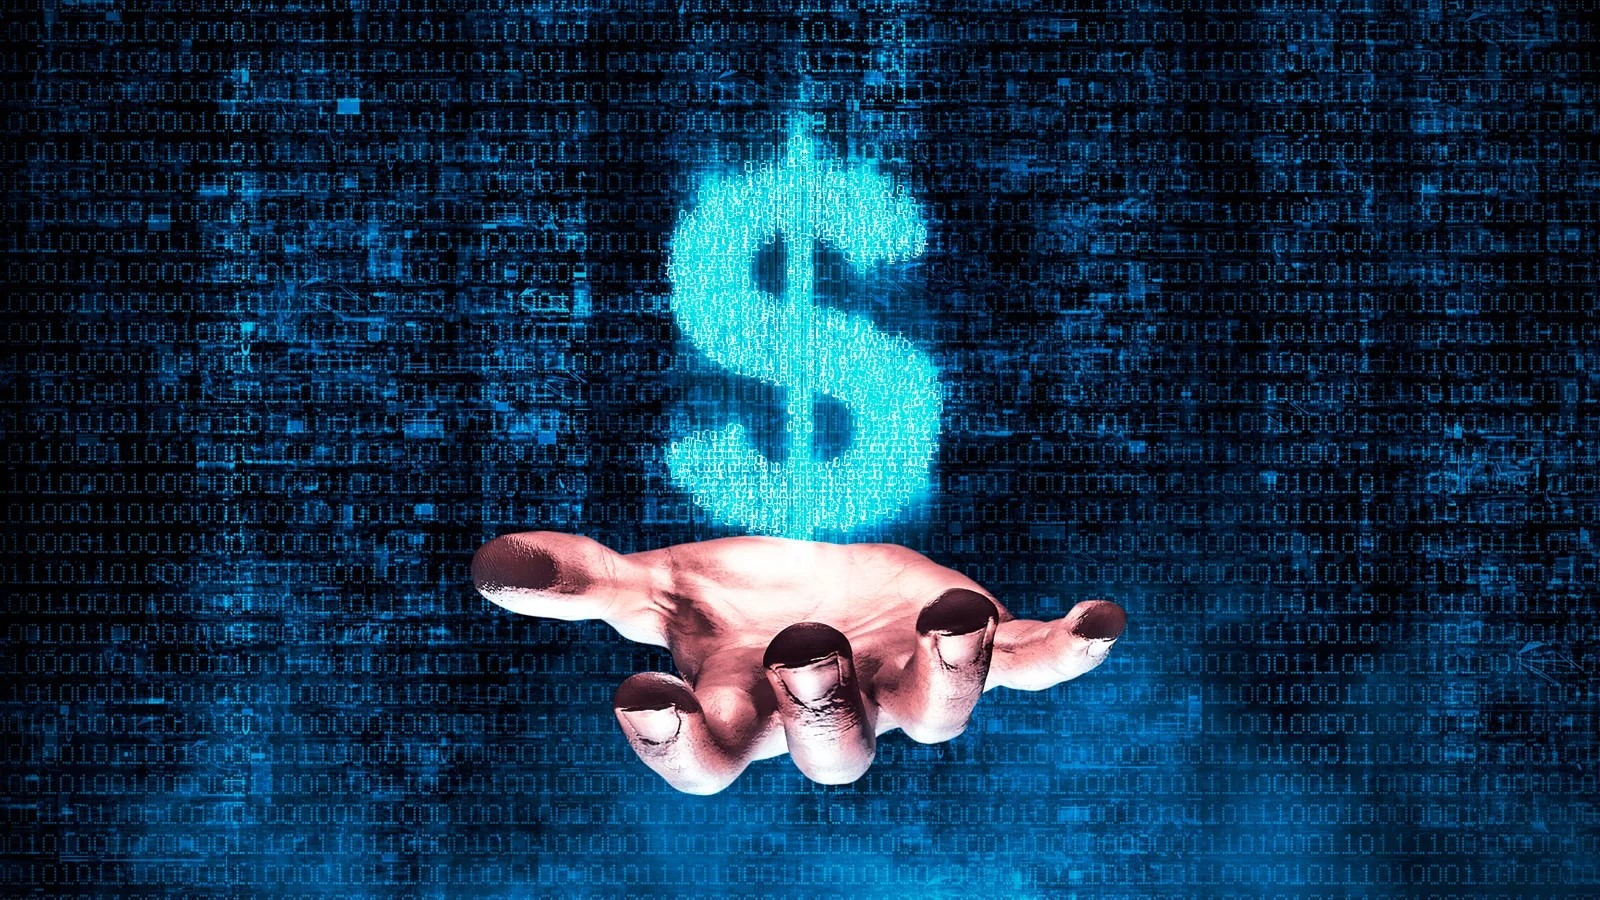 alt=Digital currency being held by a hand, representing the potential risks of cybercrime and data theft.